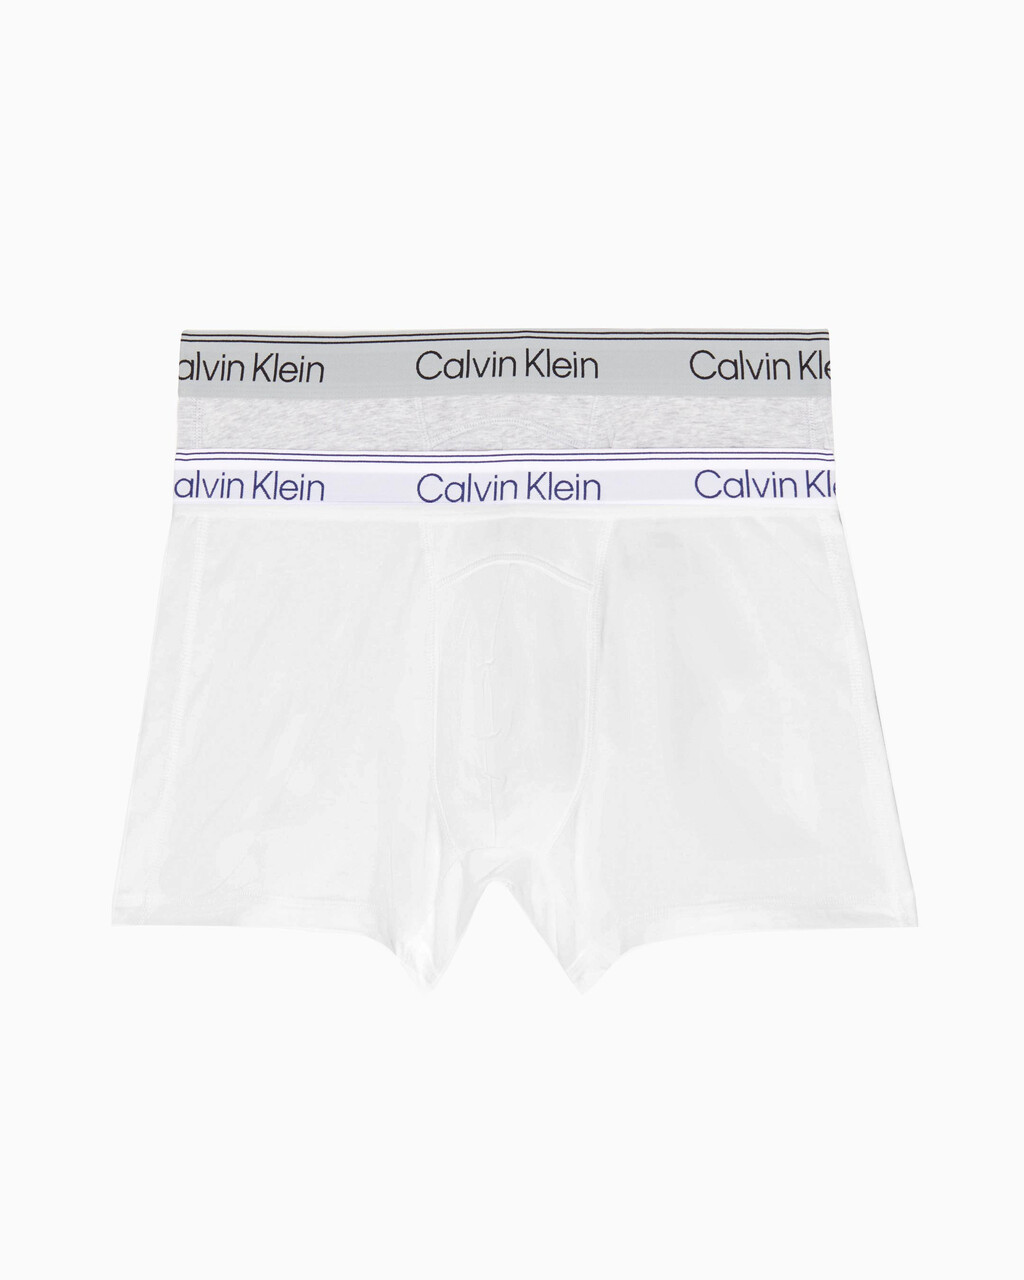 Athletic Cotton 2 Pack Trunks, multi